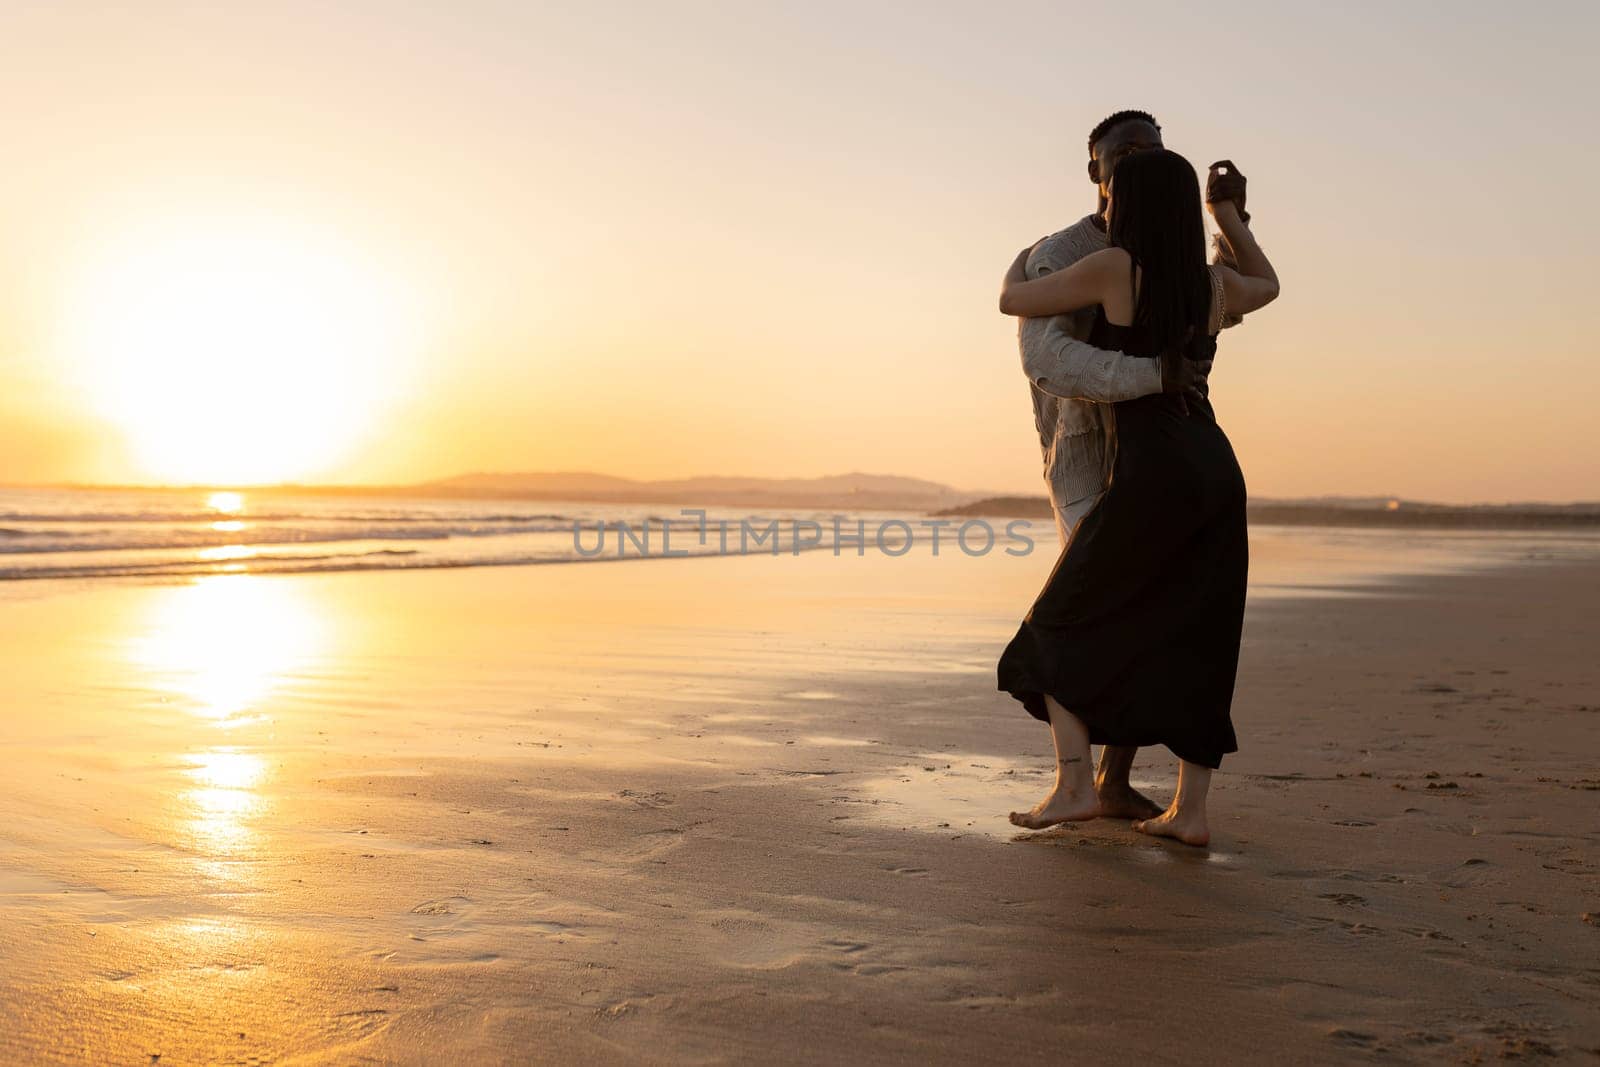 A couple dancing on the beach at sunset. The man is holding the woman's arm. Scene is romantic and peaceful